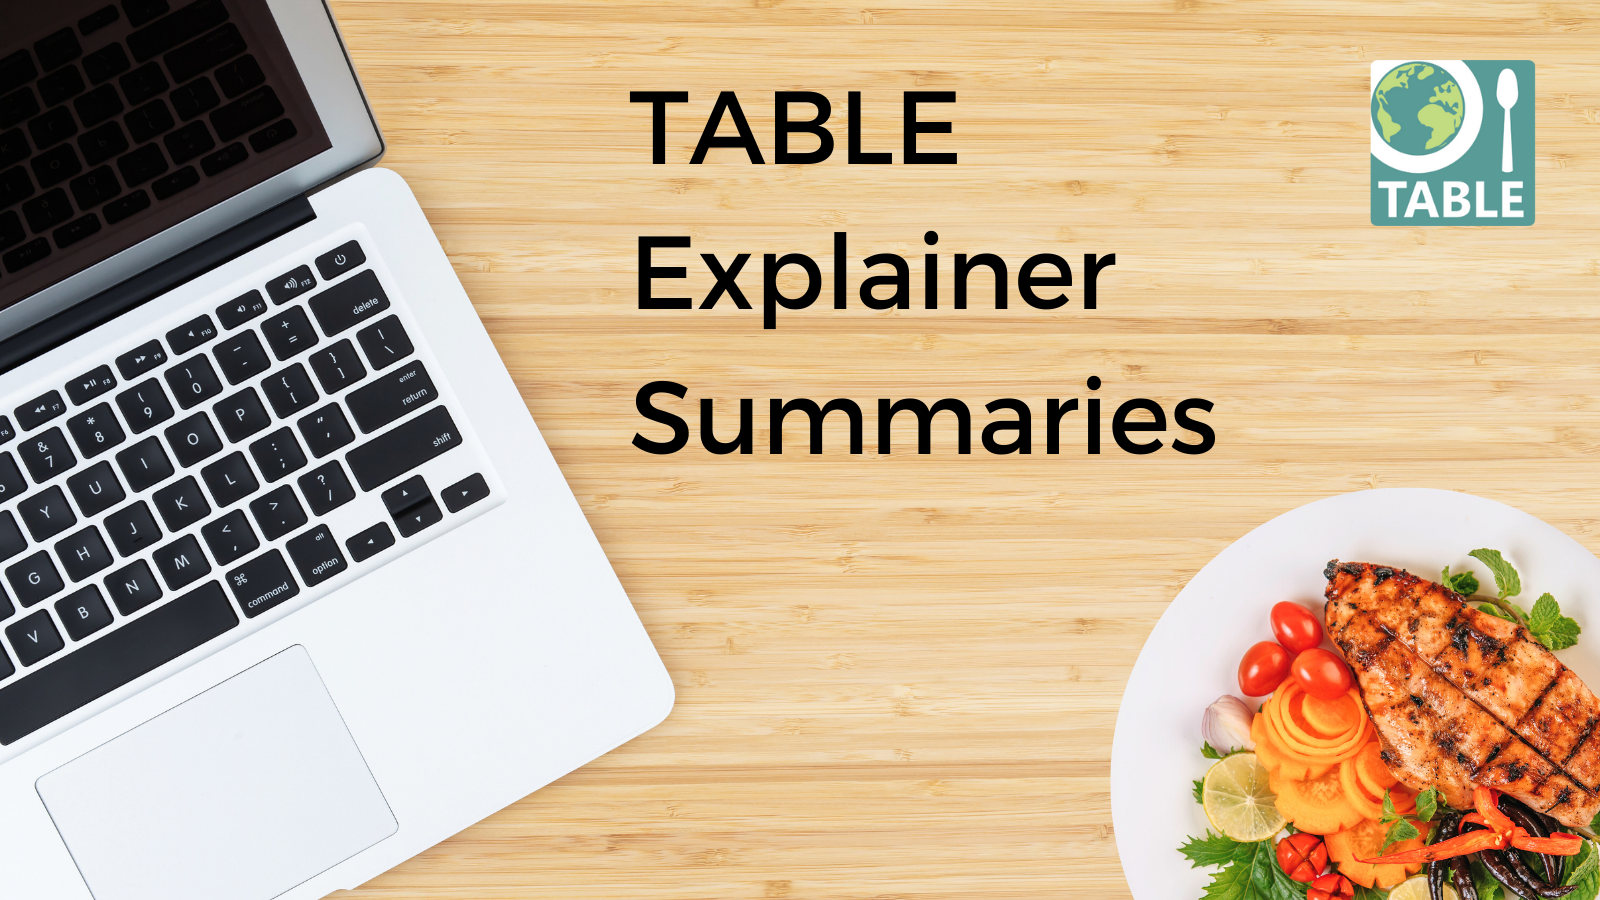 A banner featuring the TABLE logo and the text "Table explainer summaries" with laptop computer on a wooden table and a plate of food, seen from overhead.